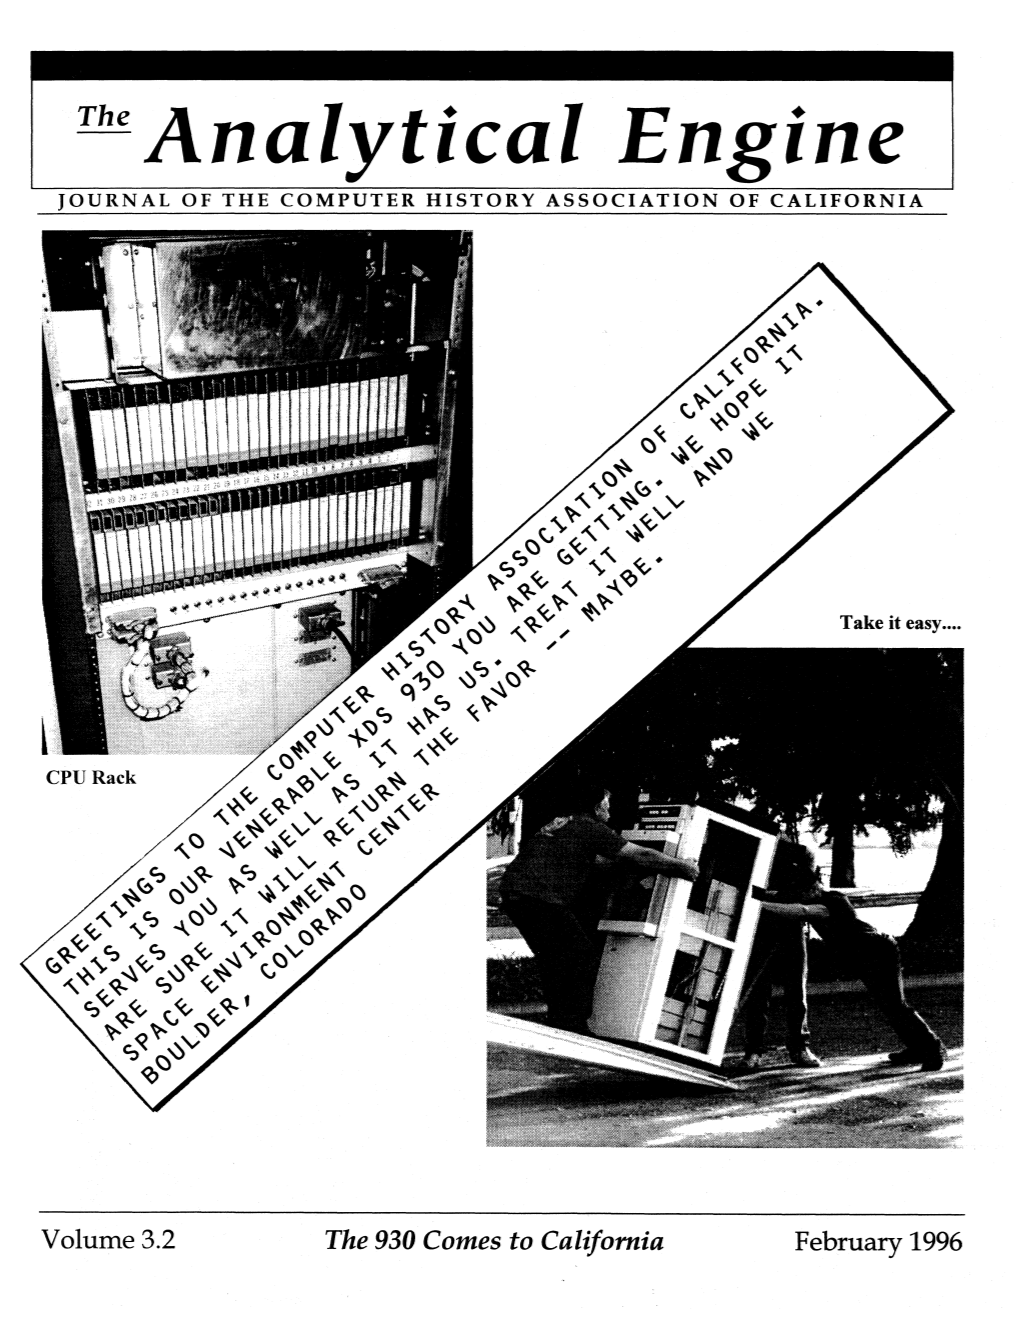 The Analytical Engine JOURNAL of the COMPUTER HISTORY ASSOCIATION of CALIFORNIA